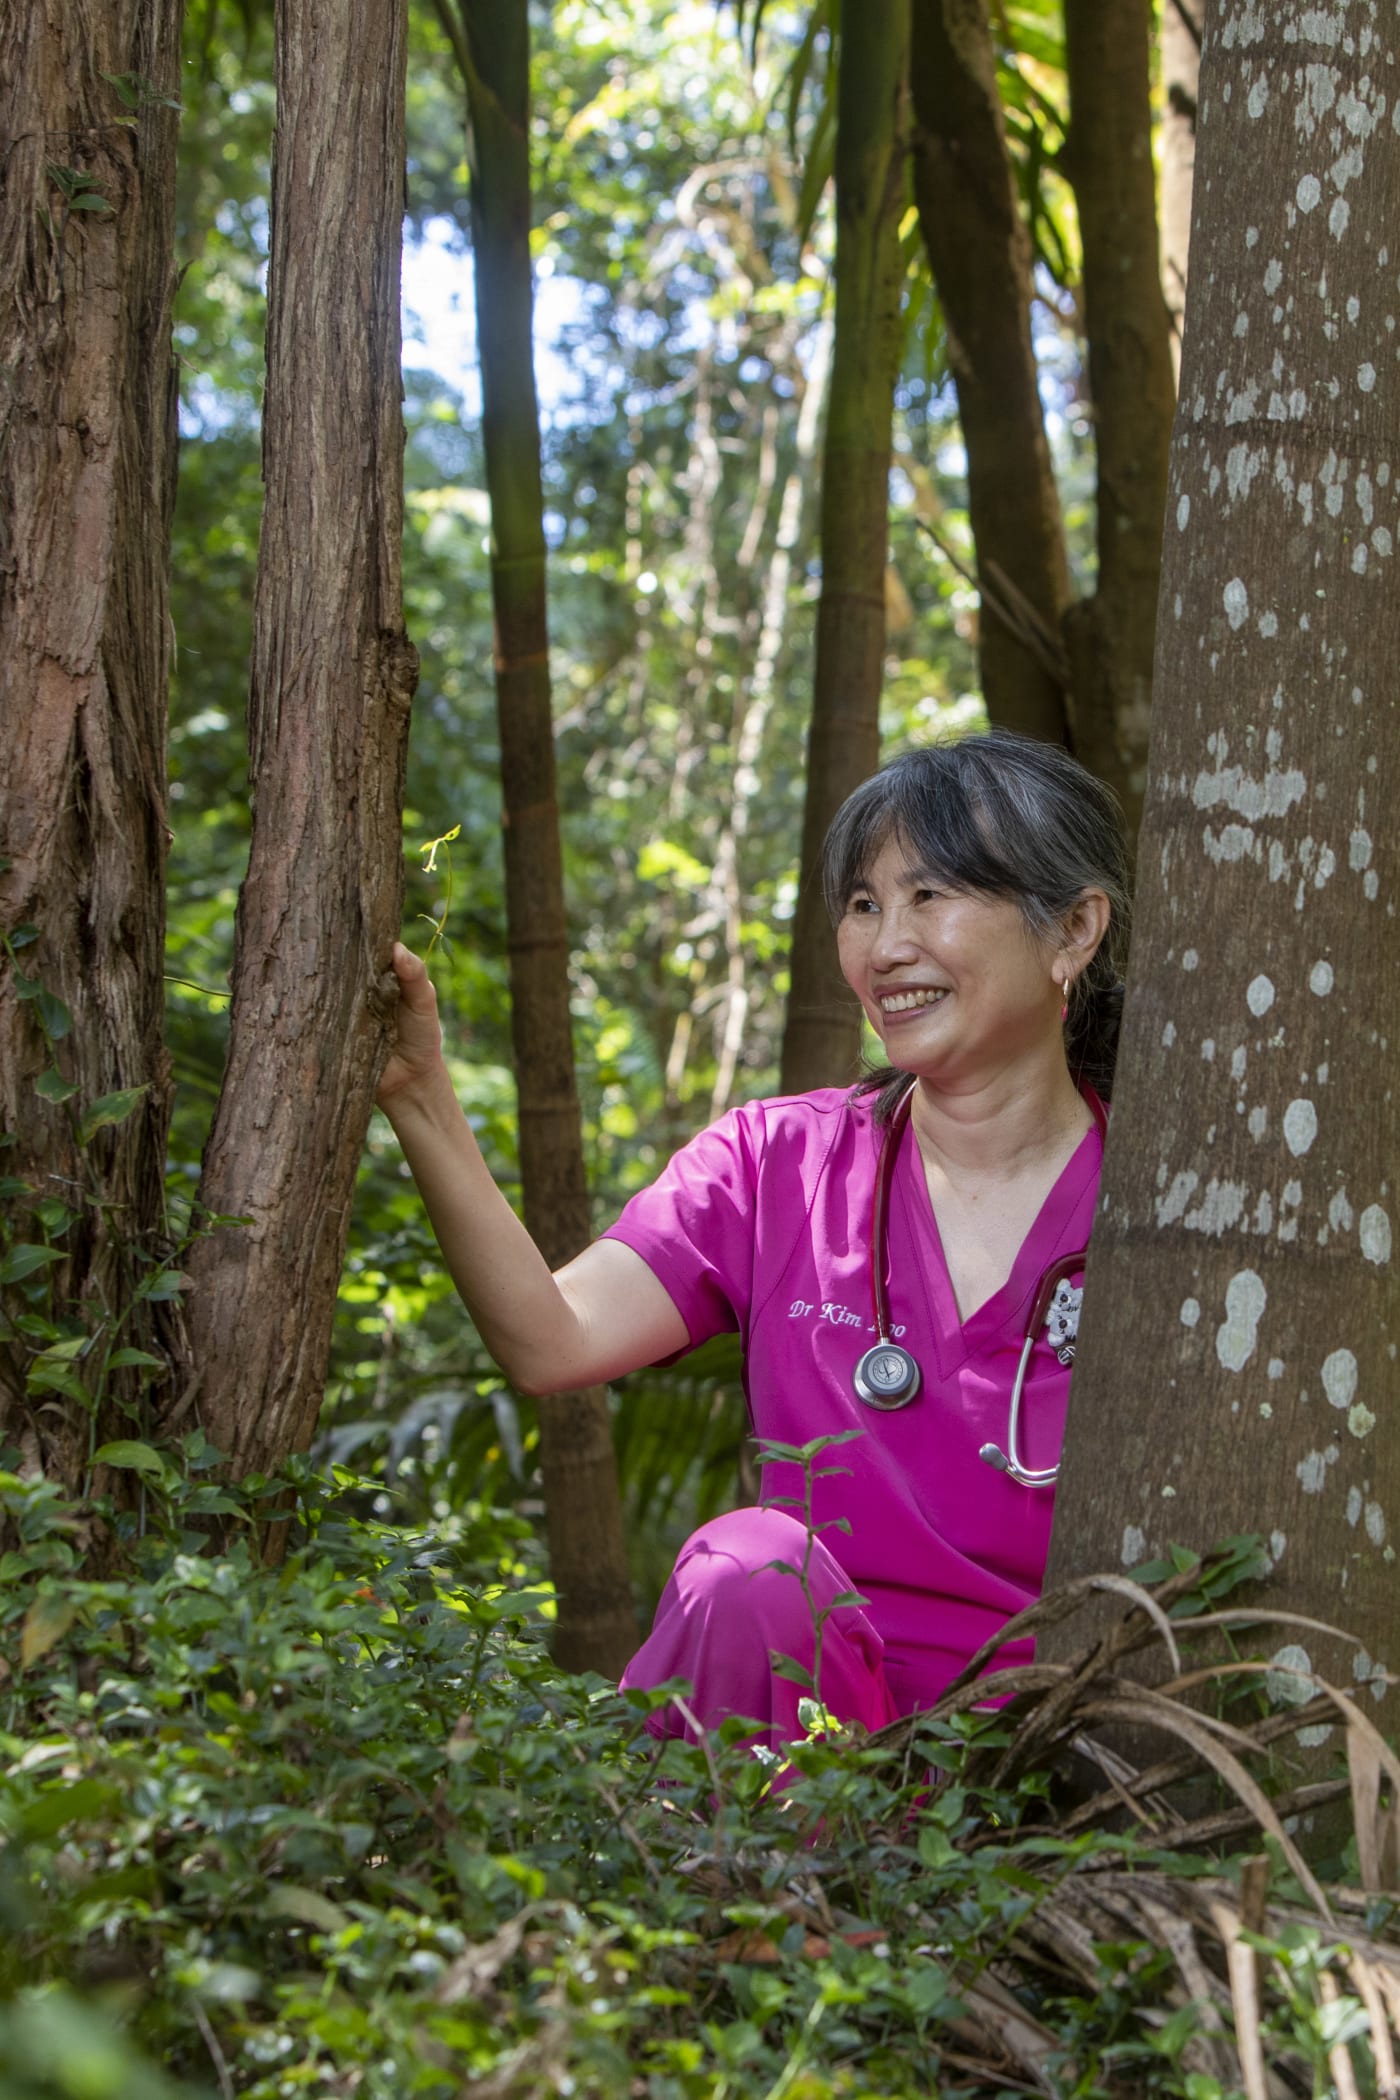 Dr Kim Loo from Doctors for the Environment Australia admires the trees in
Cooper Park, Bellevue Hill. Doctors for the Environment Australia (DEA) has
joined forces with WWF-Australia to highlight the health benefits of trees, as part
of a campaign called 'We All Need Trees'.